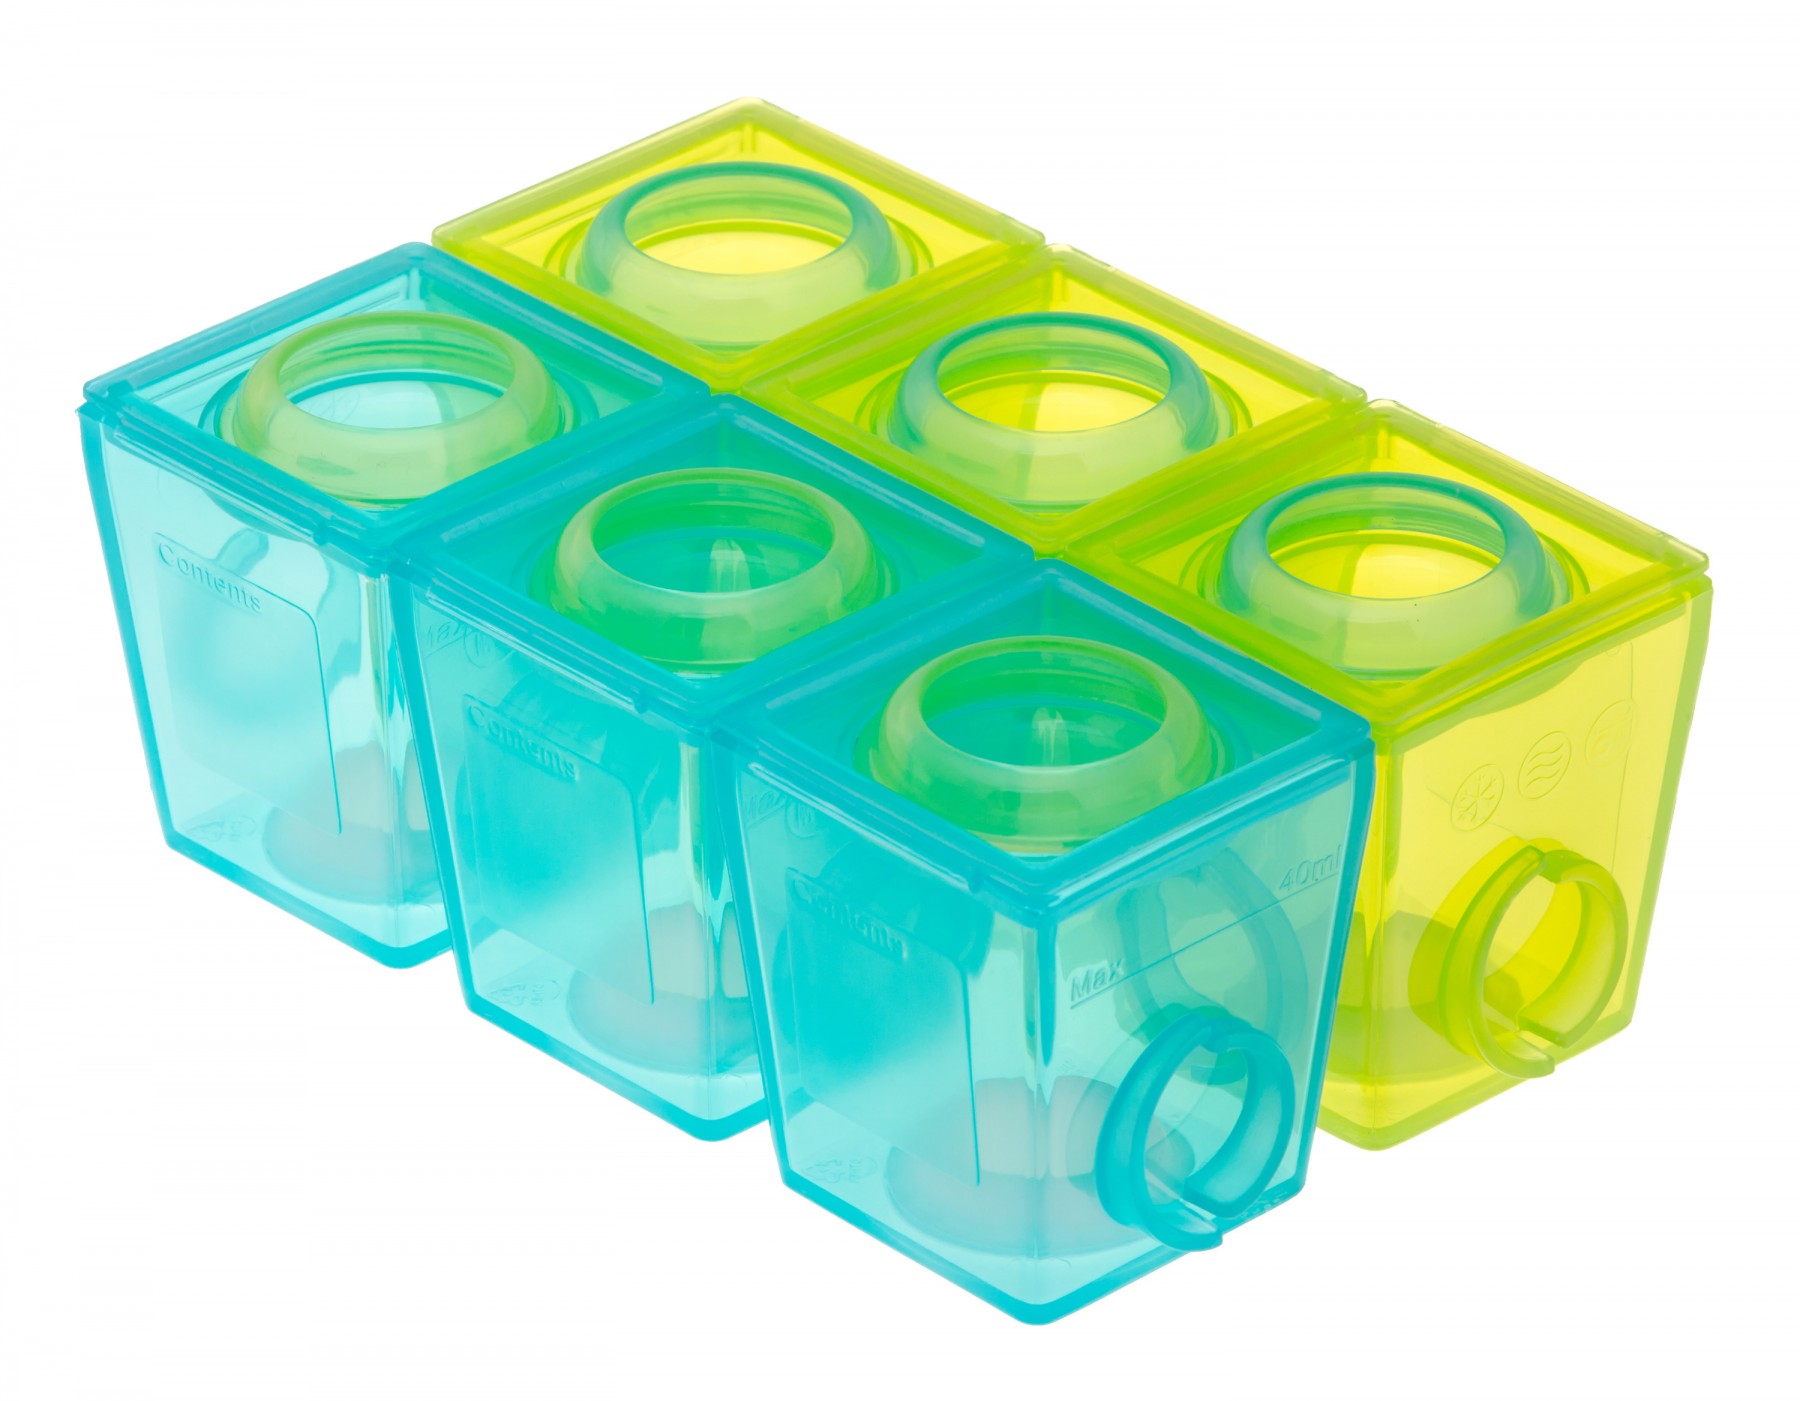 Weaning pots - Small